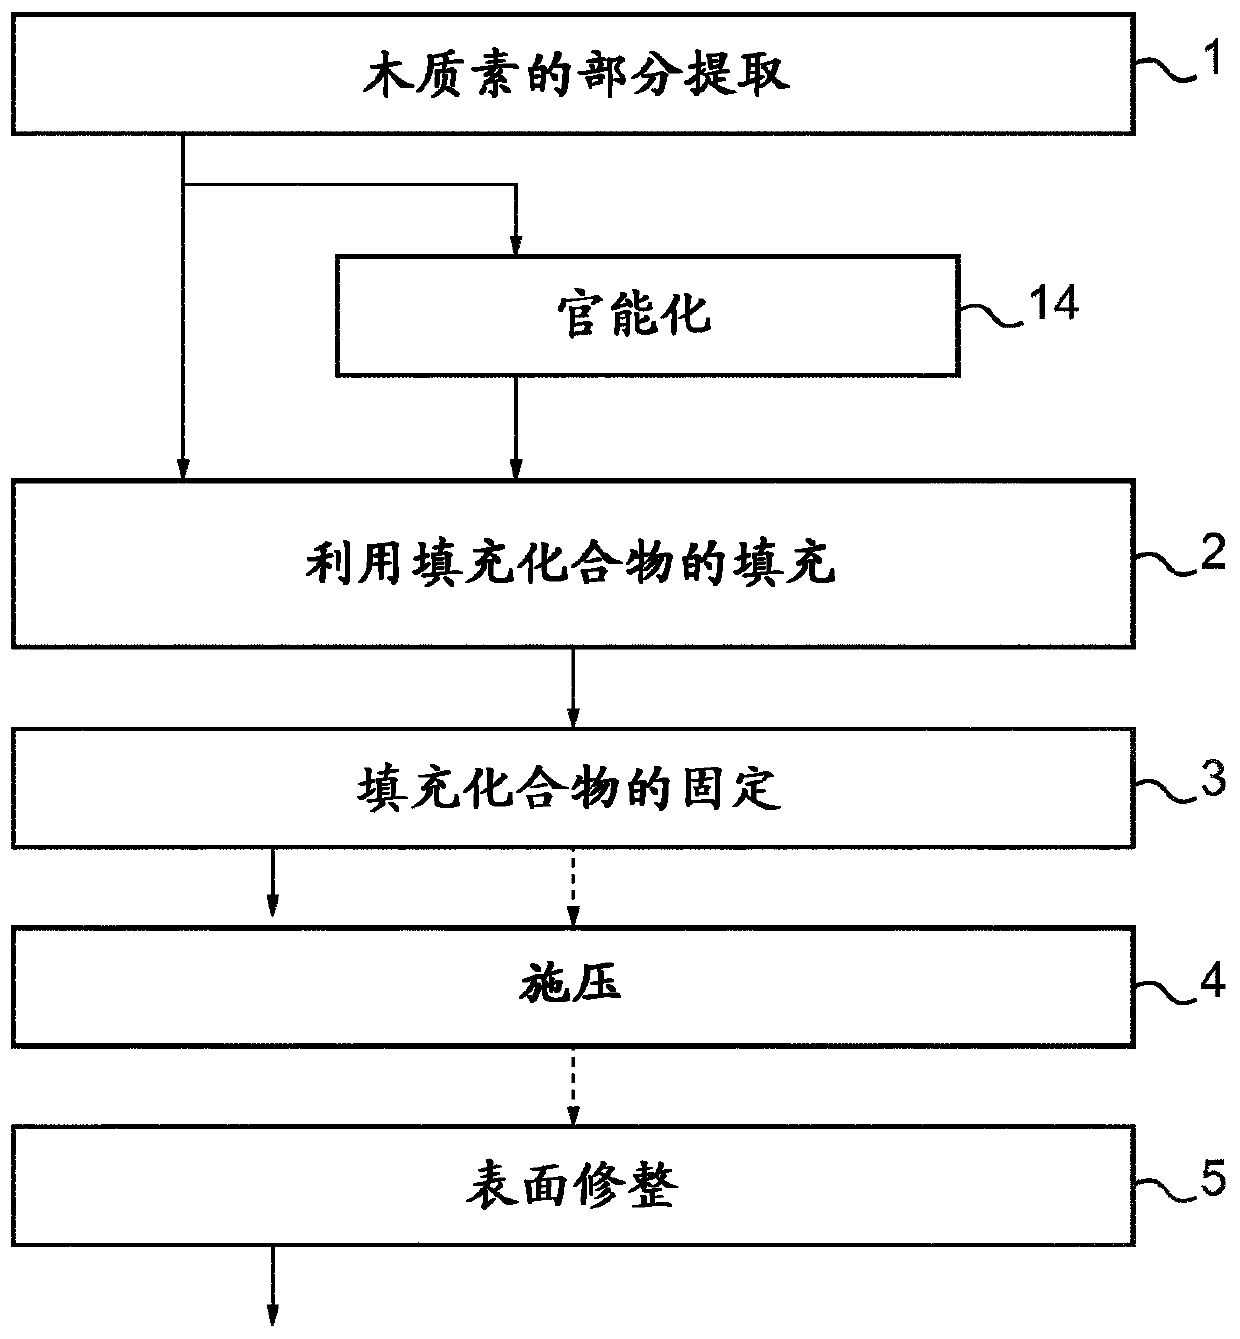 Process for supercritical or subcritical partial delignification and filling of a lignocellulosic material